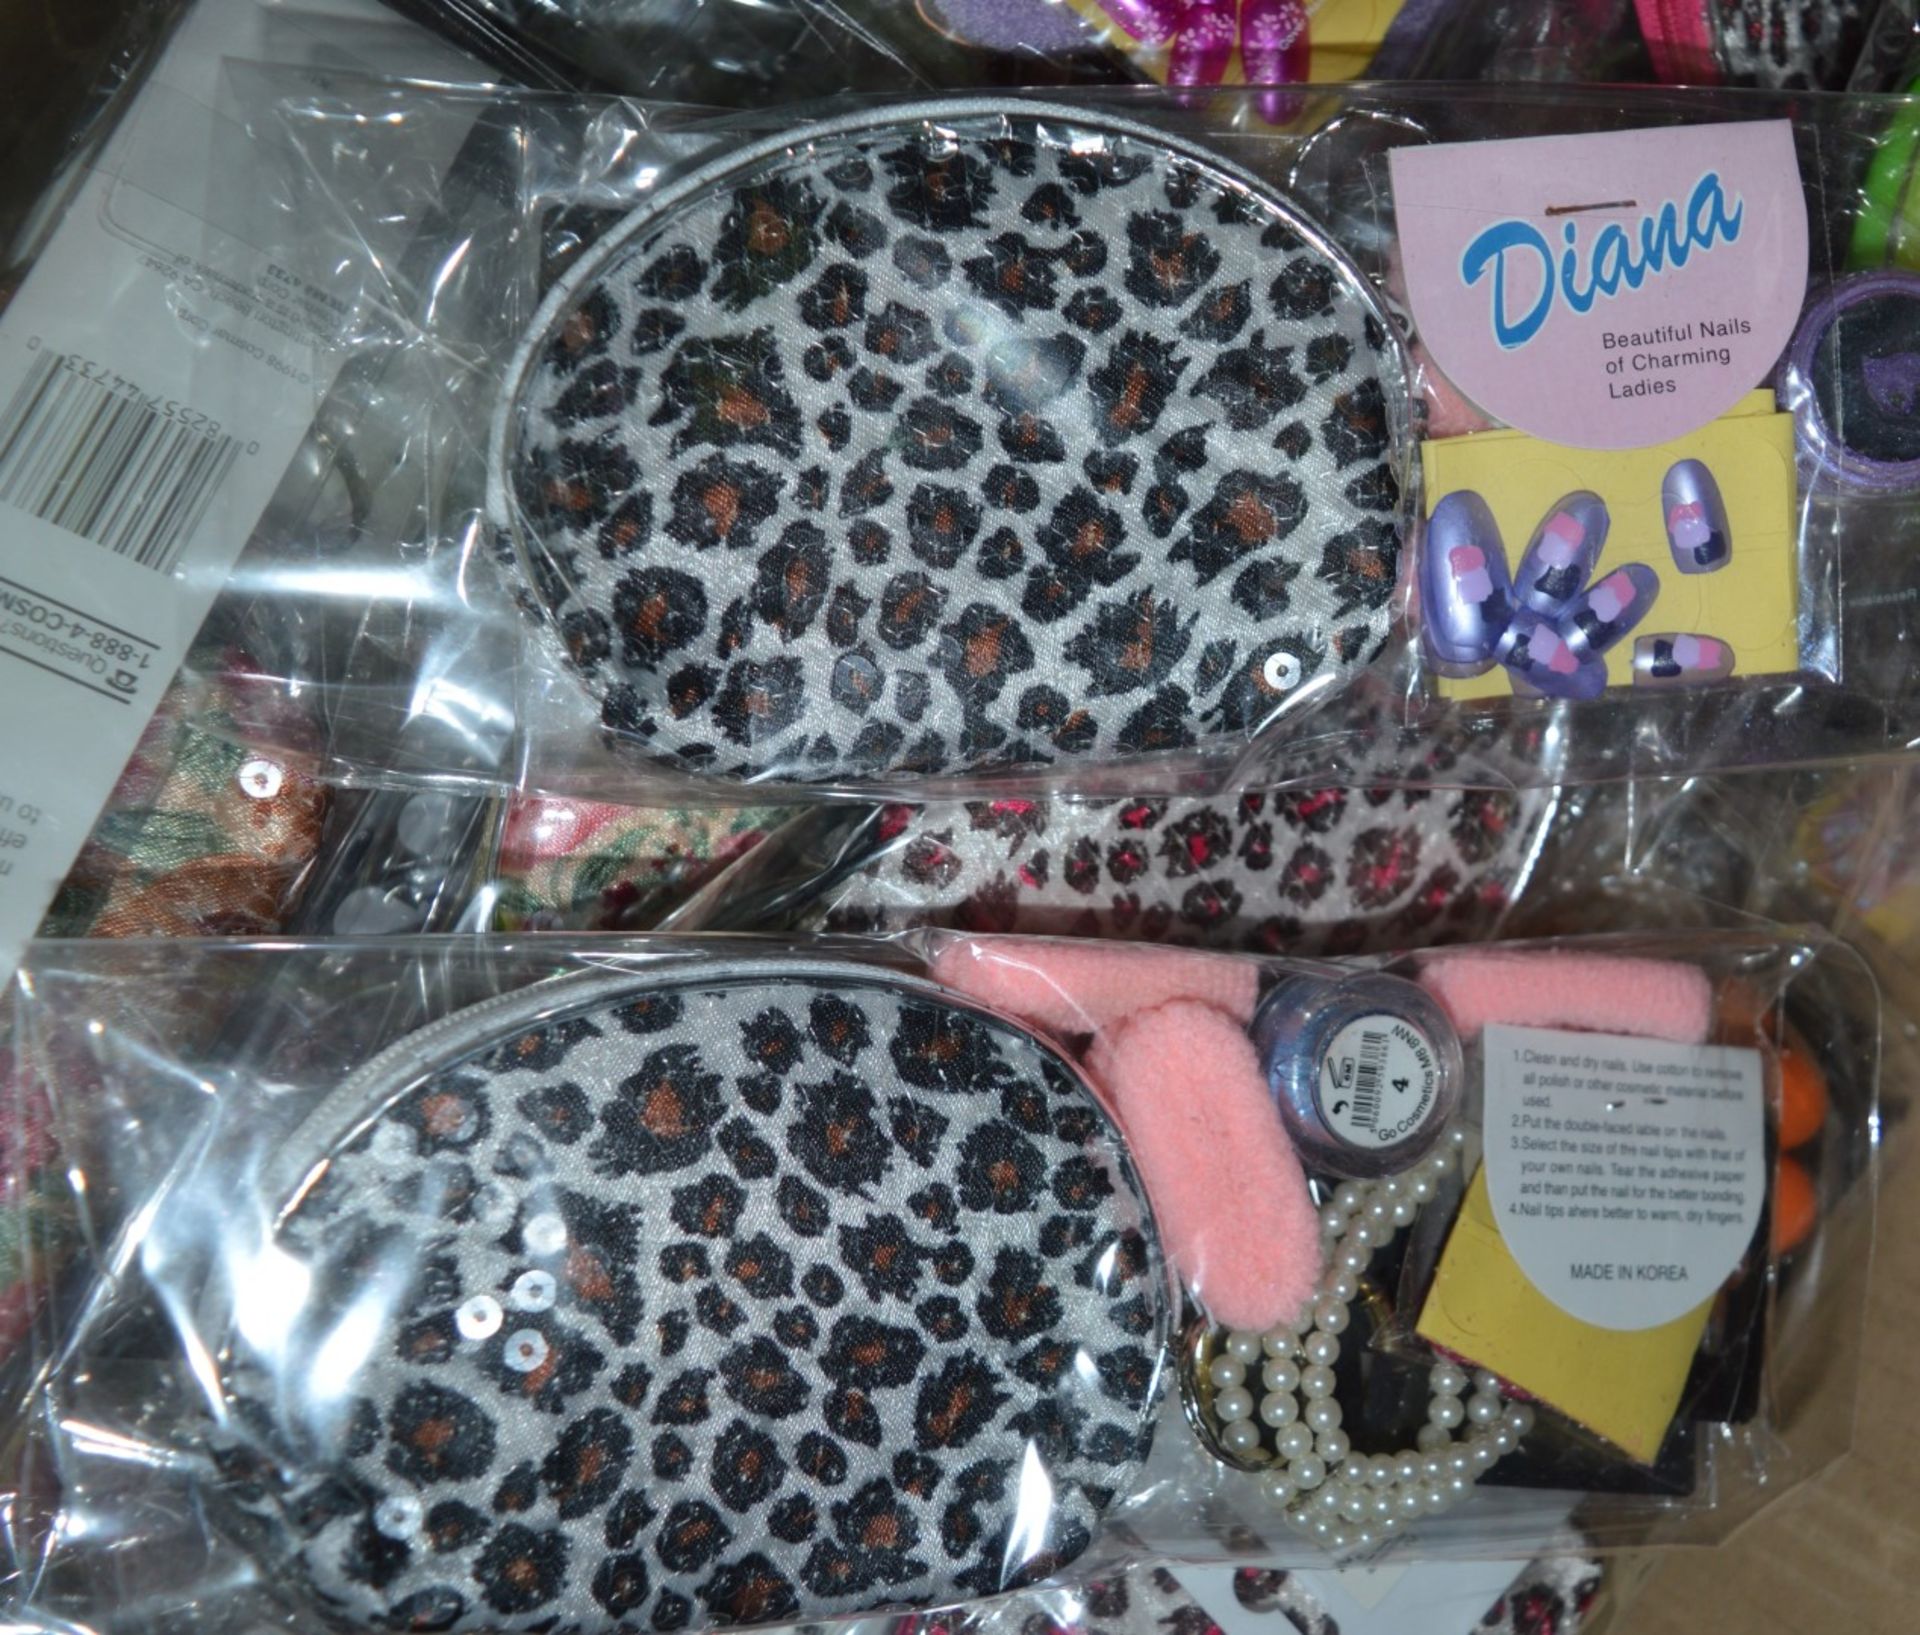 50 x Girls Beauty Gift Sets - Each Set Includes Items Such as a Stylish Purse, Ear Rings, Hair - Image 4 of 13